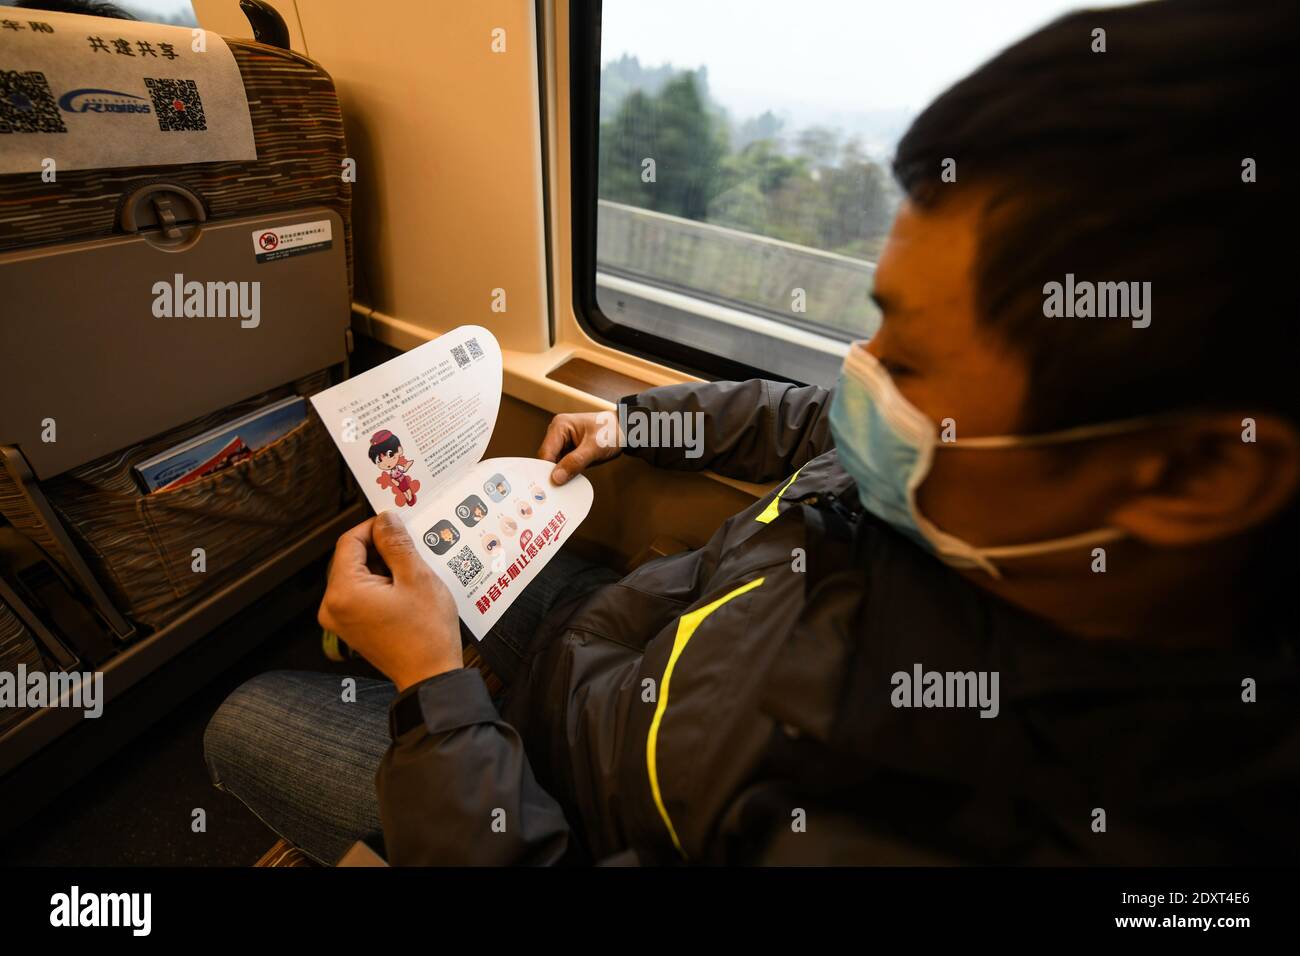 (201224) -- CHENGDU, Dec. 24, 2020 (Xinhua) -- A passenger reads the 'Quiet Car' service prompt card on high-speed train G8609 from Chengdu East Railway Station in southwest China's Sichuan Province to Shapingba Railway Station in southwest China's Chongqing on Dec. 24, 2020. Some high-speed trains in China have piloted 'quiet cars' for passengers who opt for a quiet and undisturbed travel experience. The 'quiet car' is often the No. 3 carriage on the train, with onboard videos muted and announcements made at a lower volume. Doors at the ends of the carriage will be closed to reduce noise fro Stock Photo